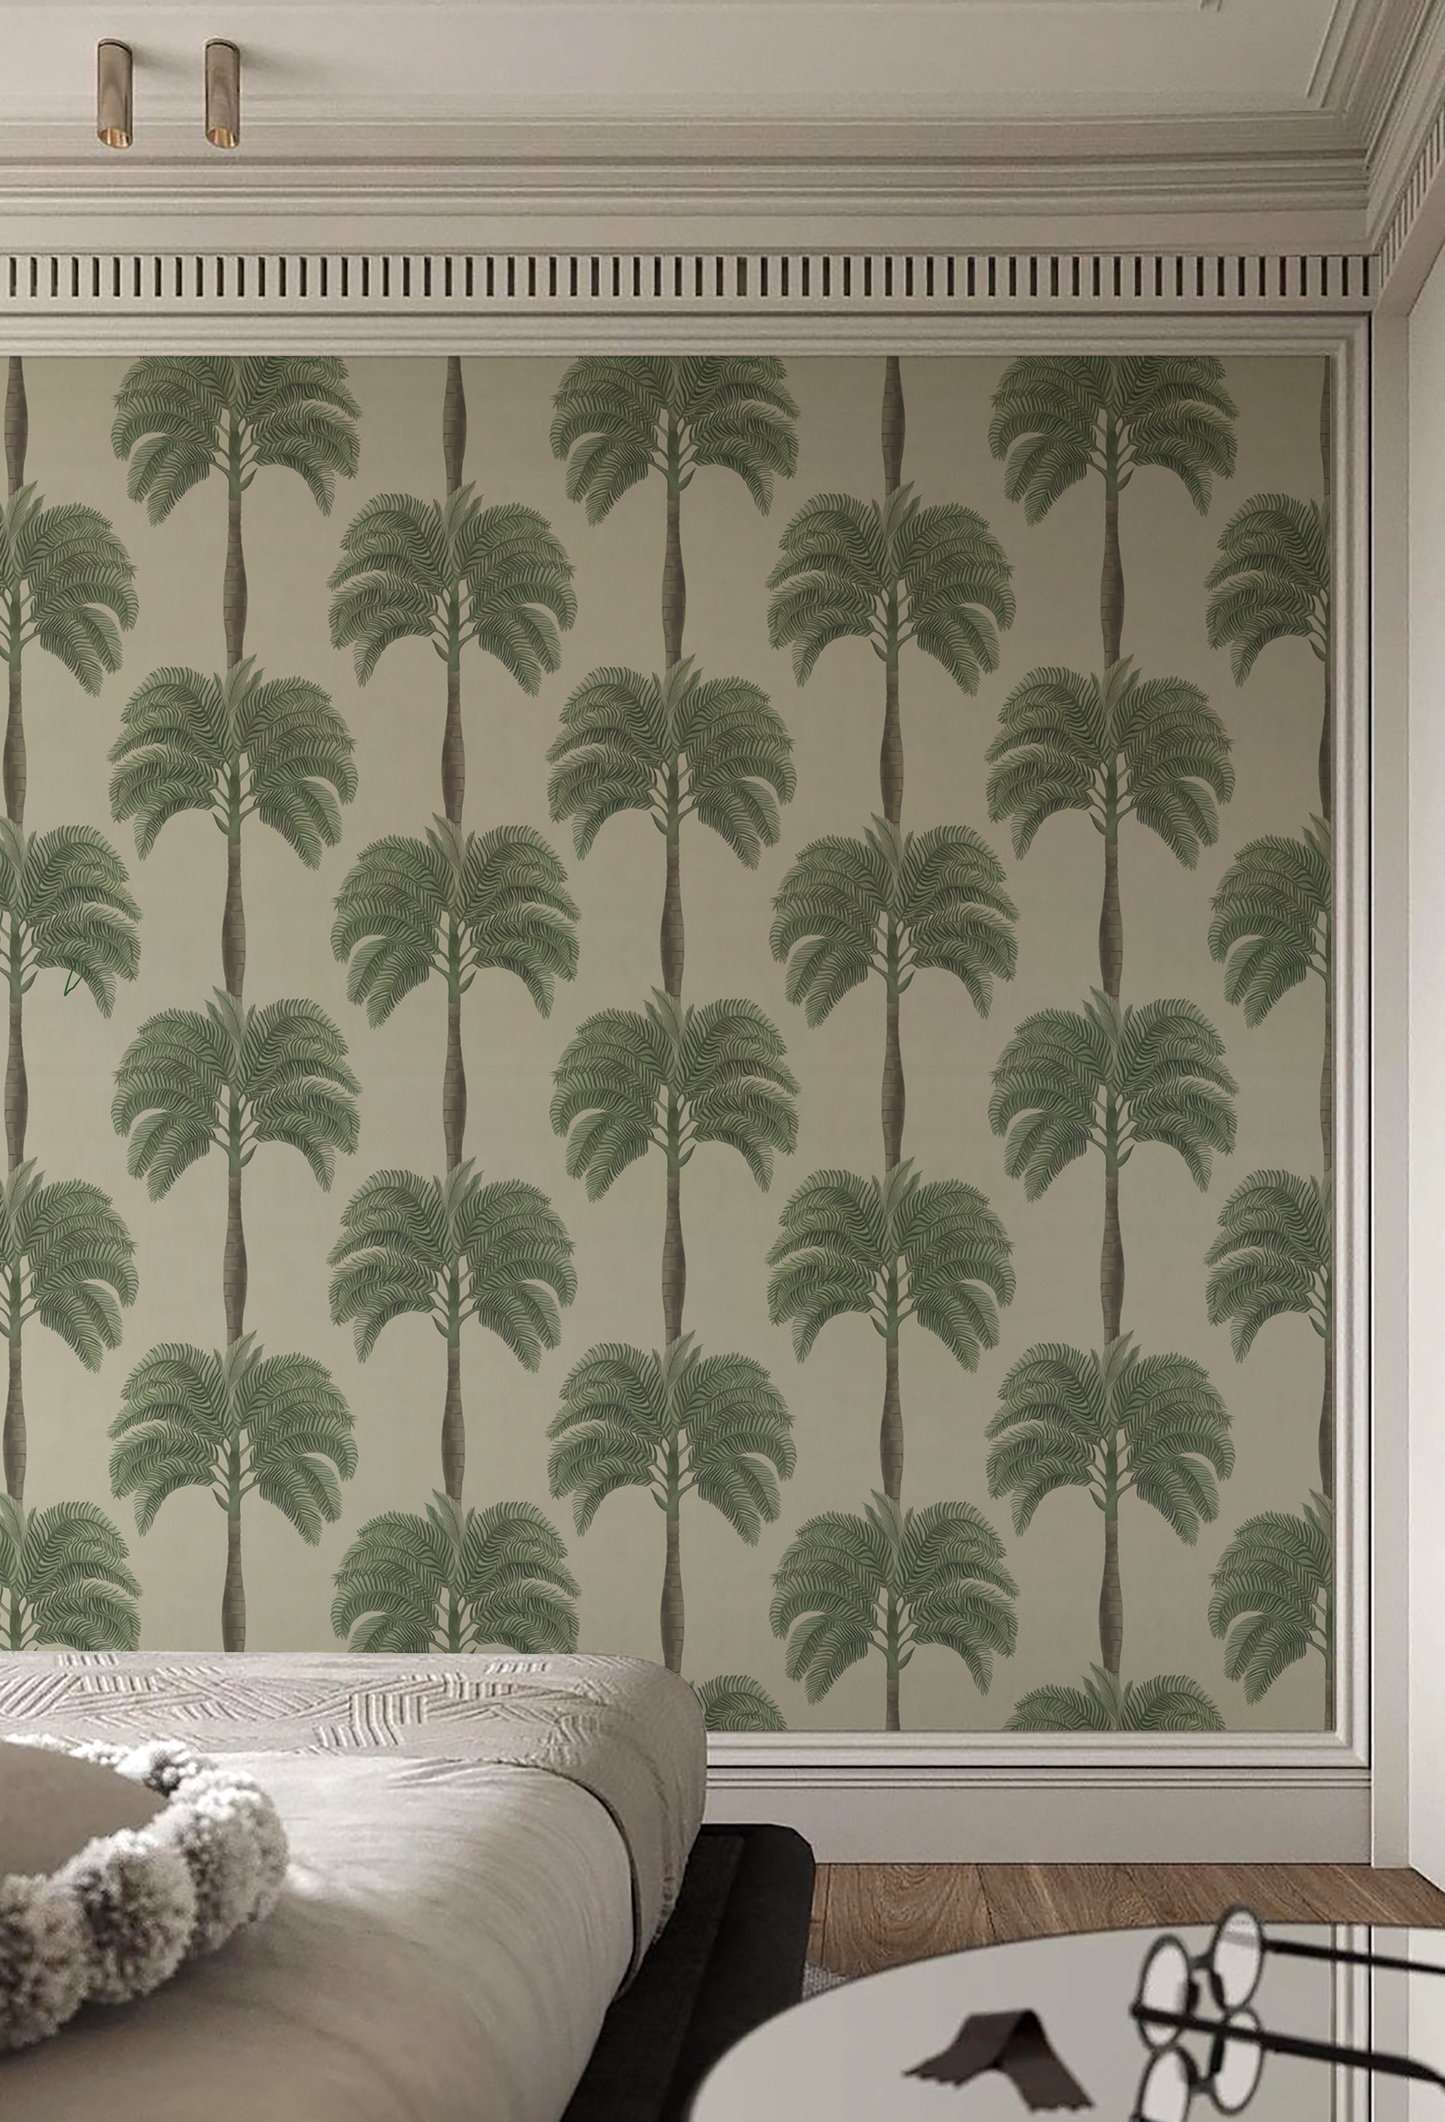 Luxury bedroom with bed and palm tree botanical Deus ex Gardenia's 'Palma' in Sand wallpaper. Photo by HDM2 Architects.